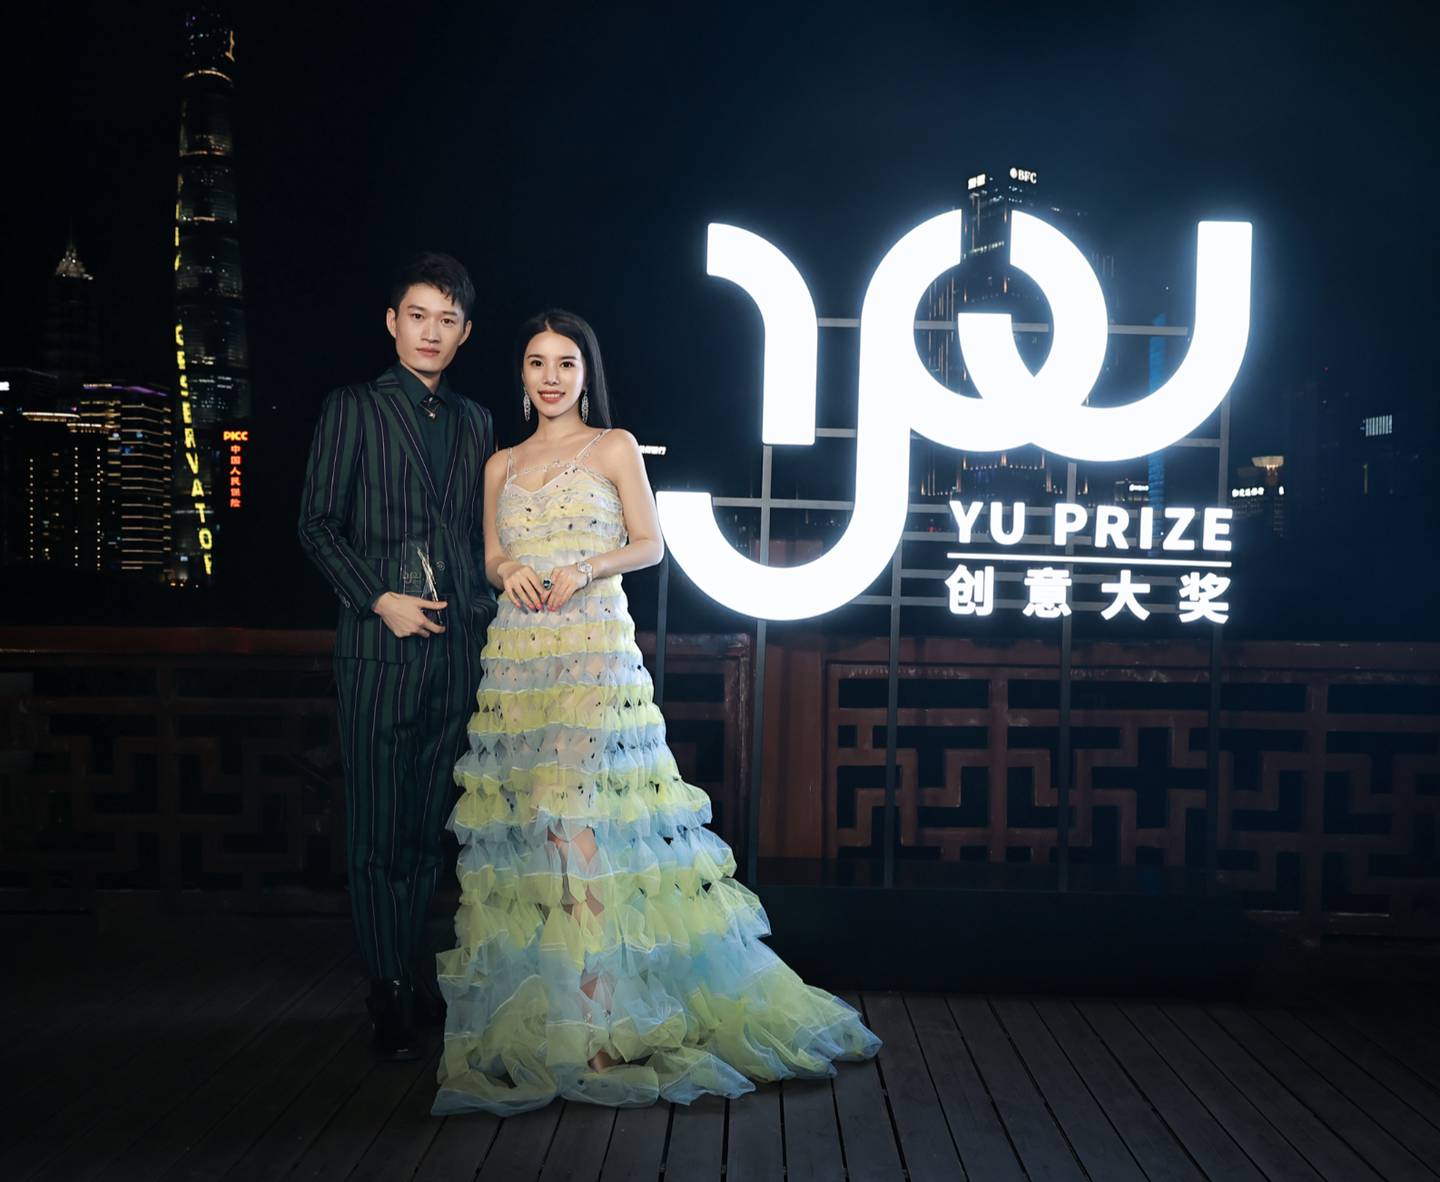 Chen Peng and Wendy Yu at the awarding of the Yu Prize in Shanghai. Yu Prize